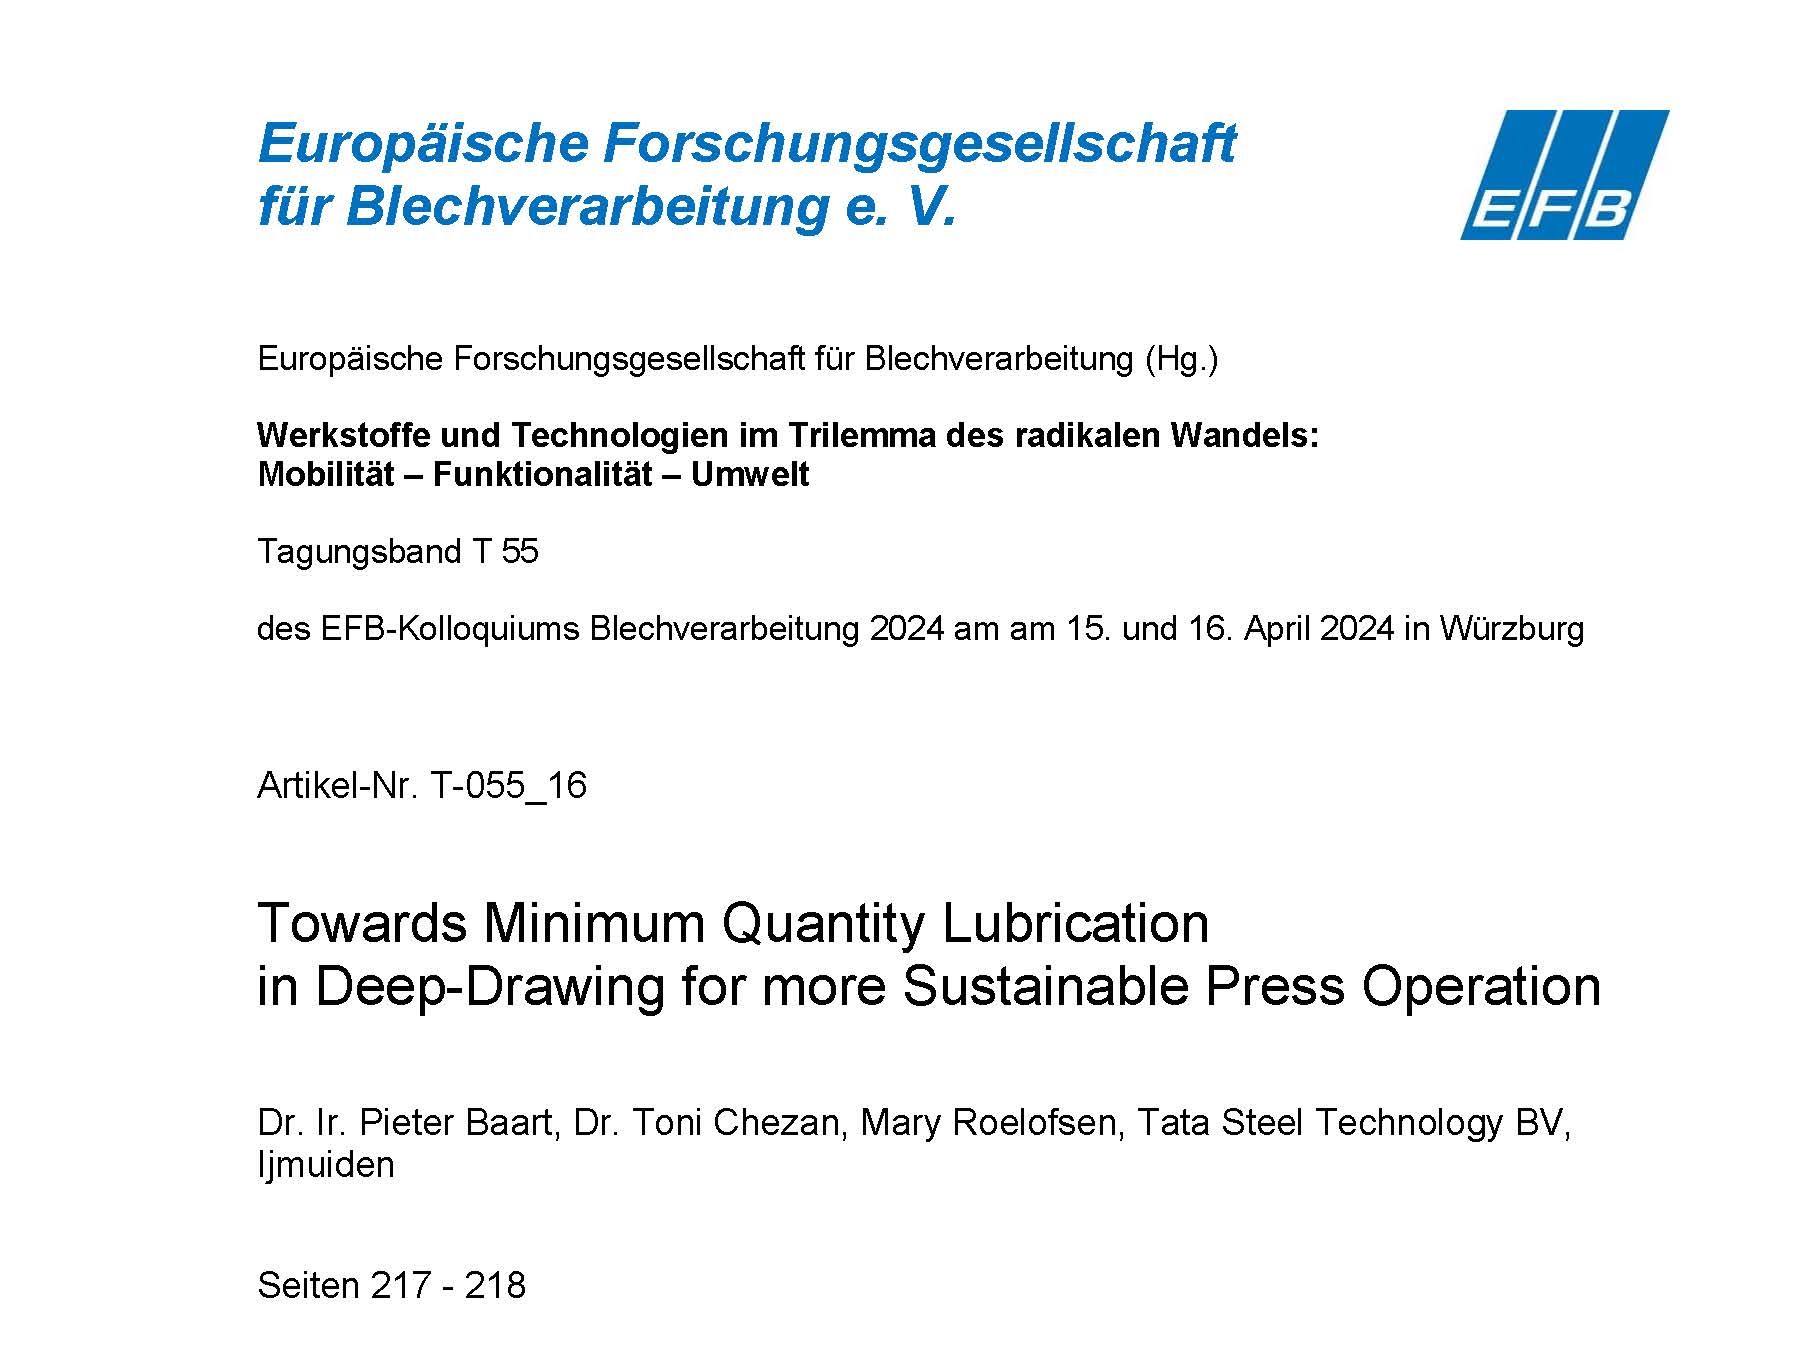 Towards Minimum Quantity Lubrication in Deep-Drawing for more Sustainable Press Operation